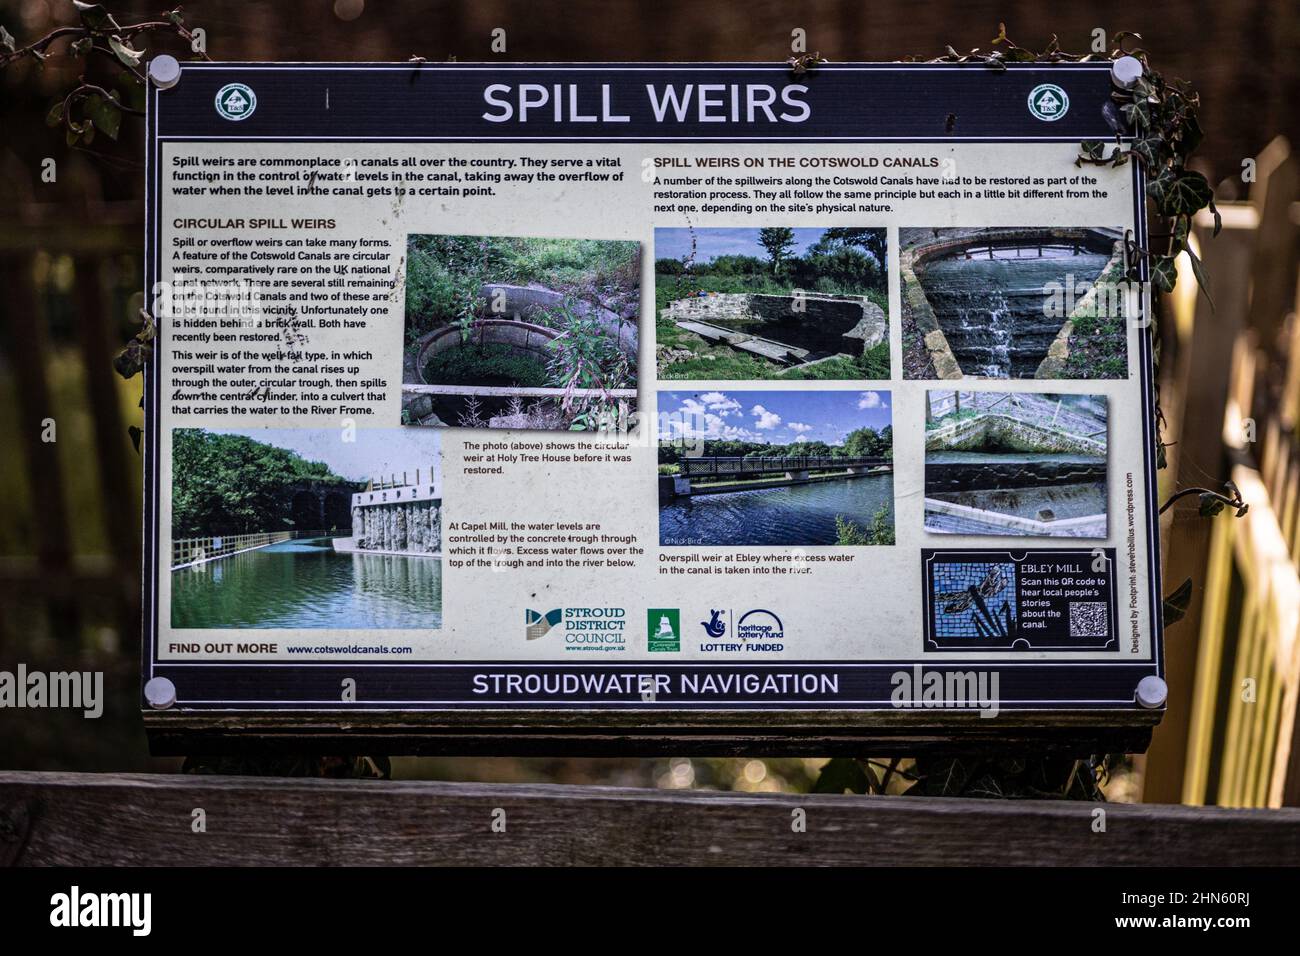 information board on spill weirs, Stroudwater, England Stock Photo